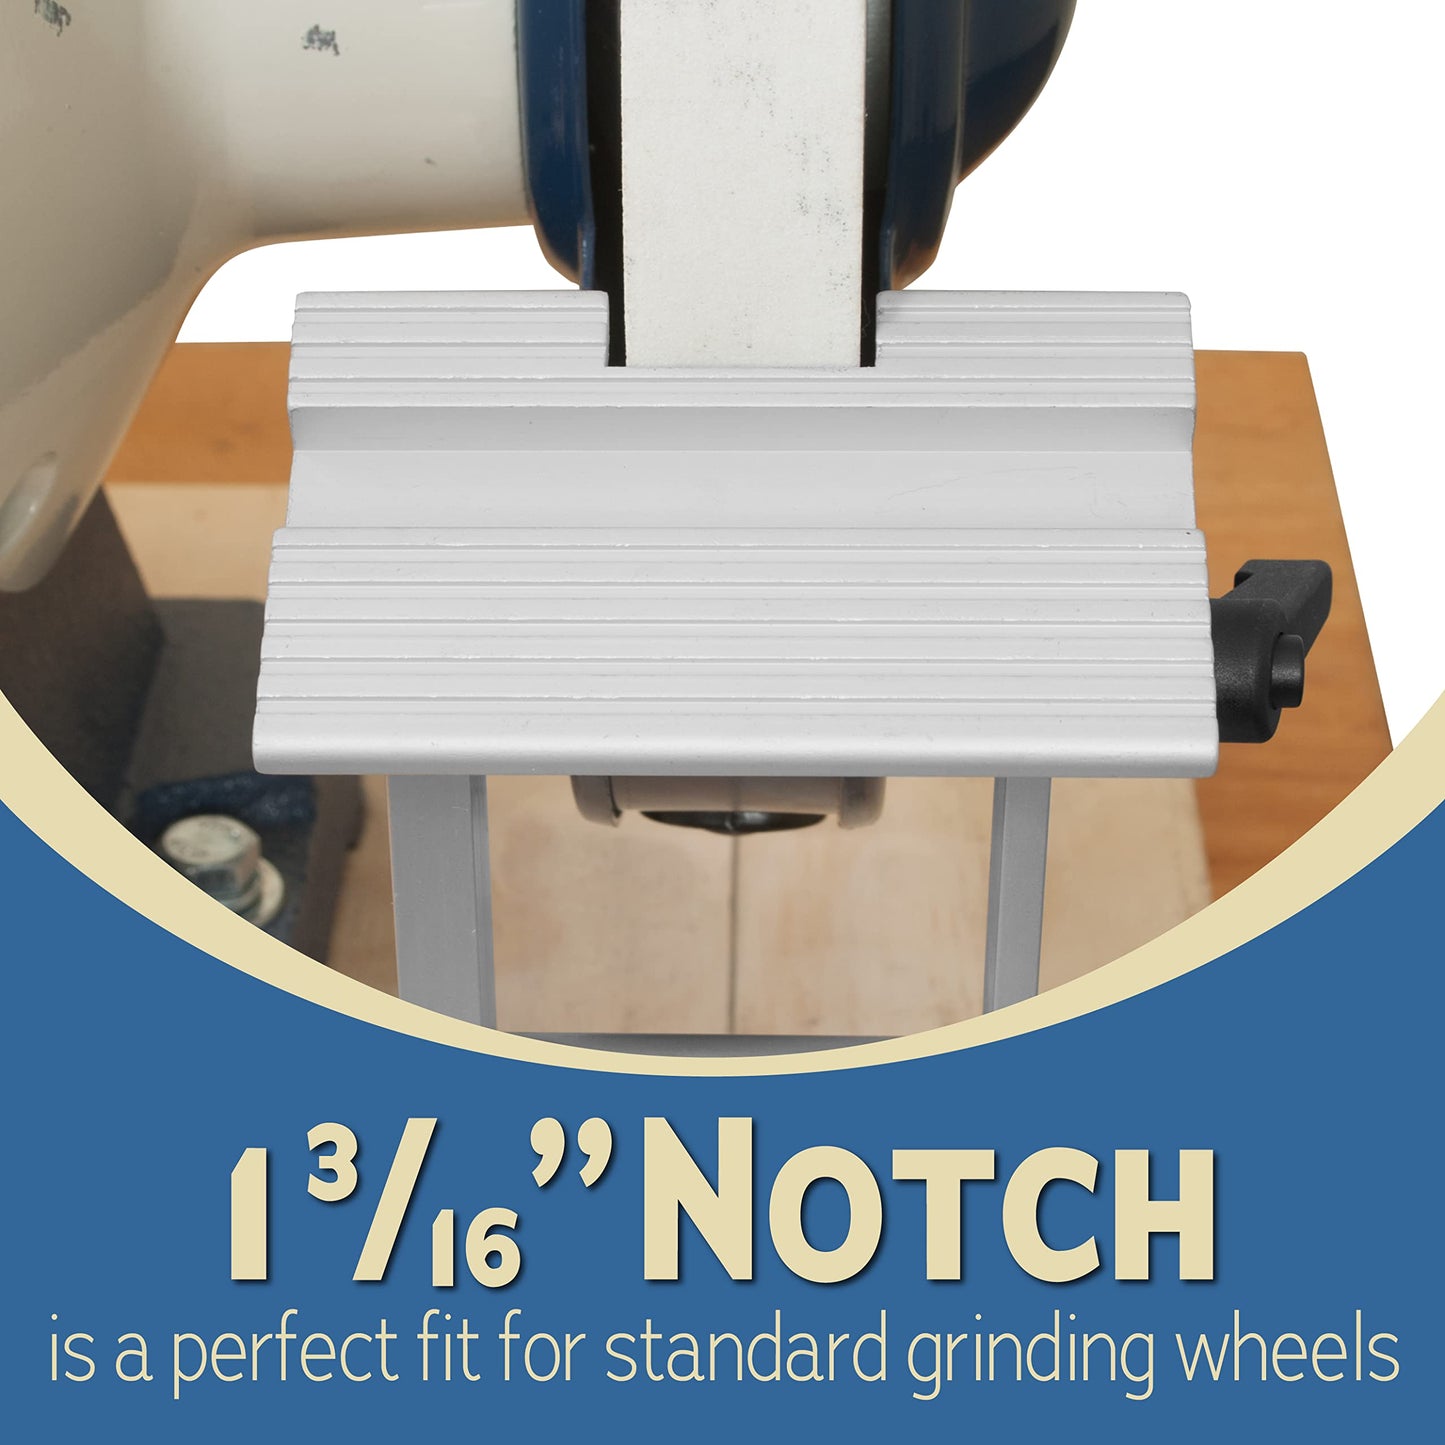 Adjustable Replacement Tool Rest Sharpening Jig for 6 inch or 8 inch Bench Grinders and Sanders • Includes a Pivoting Miter Slide and Flat Miter